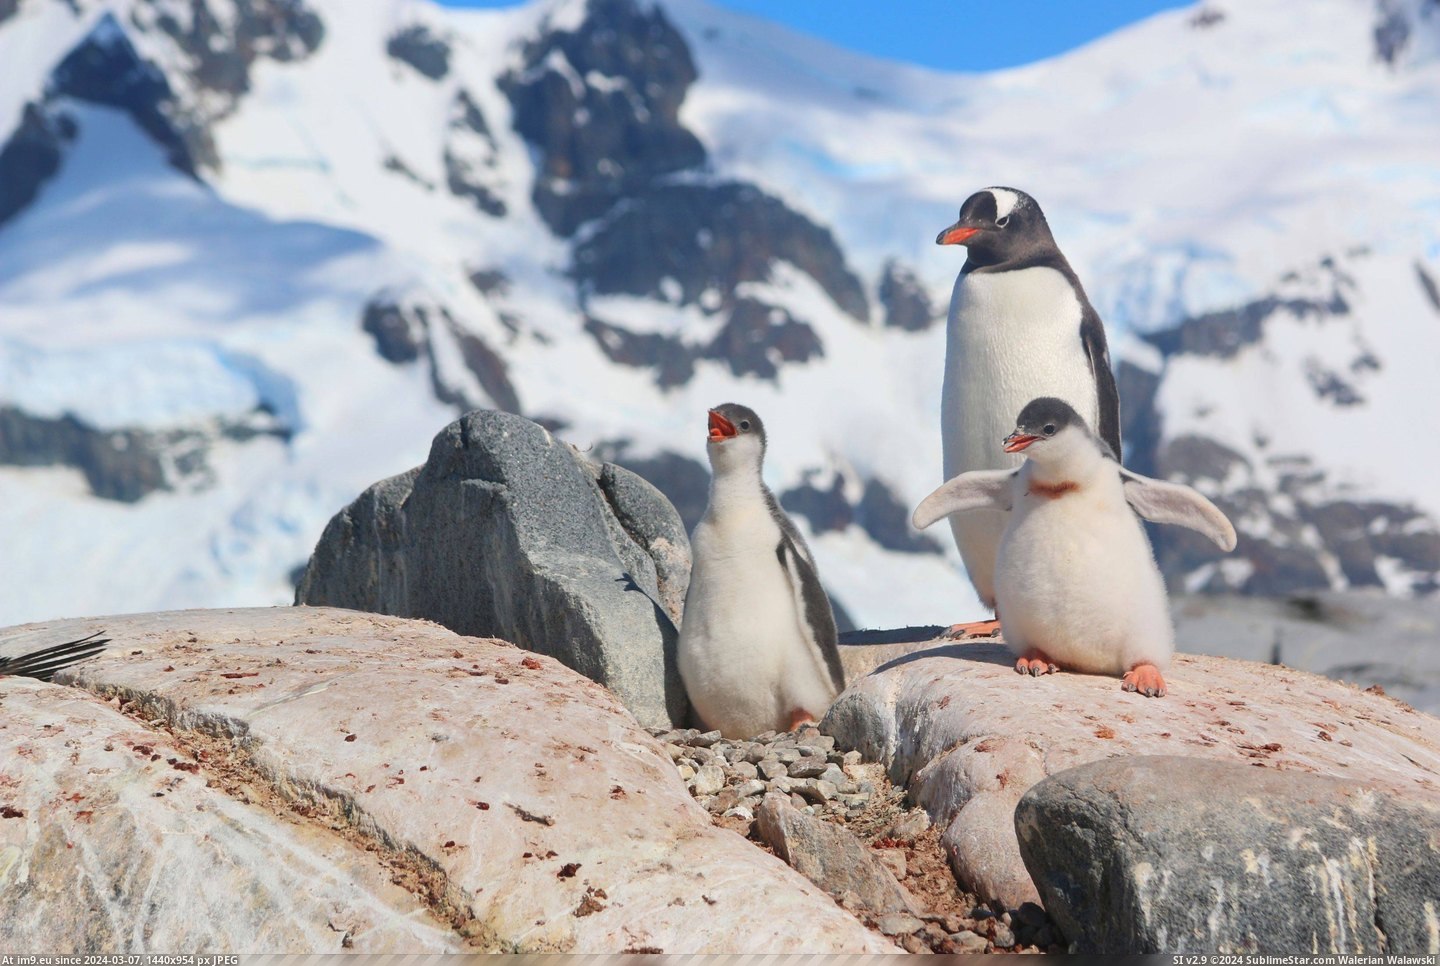 #Wallpaper #Beautiful #Happy #Snow #Highres #Antarctica #Opportunity #Family #Month #Ran #Visit [Aww] Last month I had the opportunity to visit Antarctica, where I ran into this happy family! Pic. (Изображение из альбом My r/AWW favs))